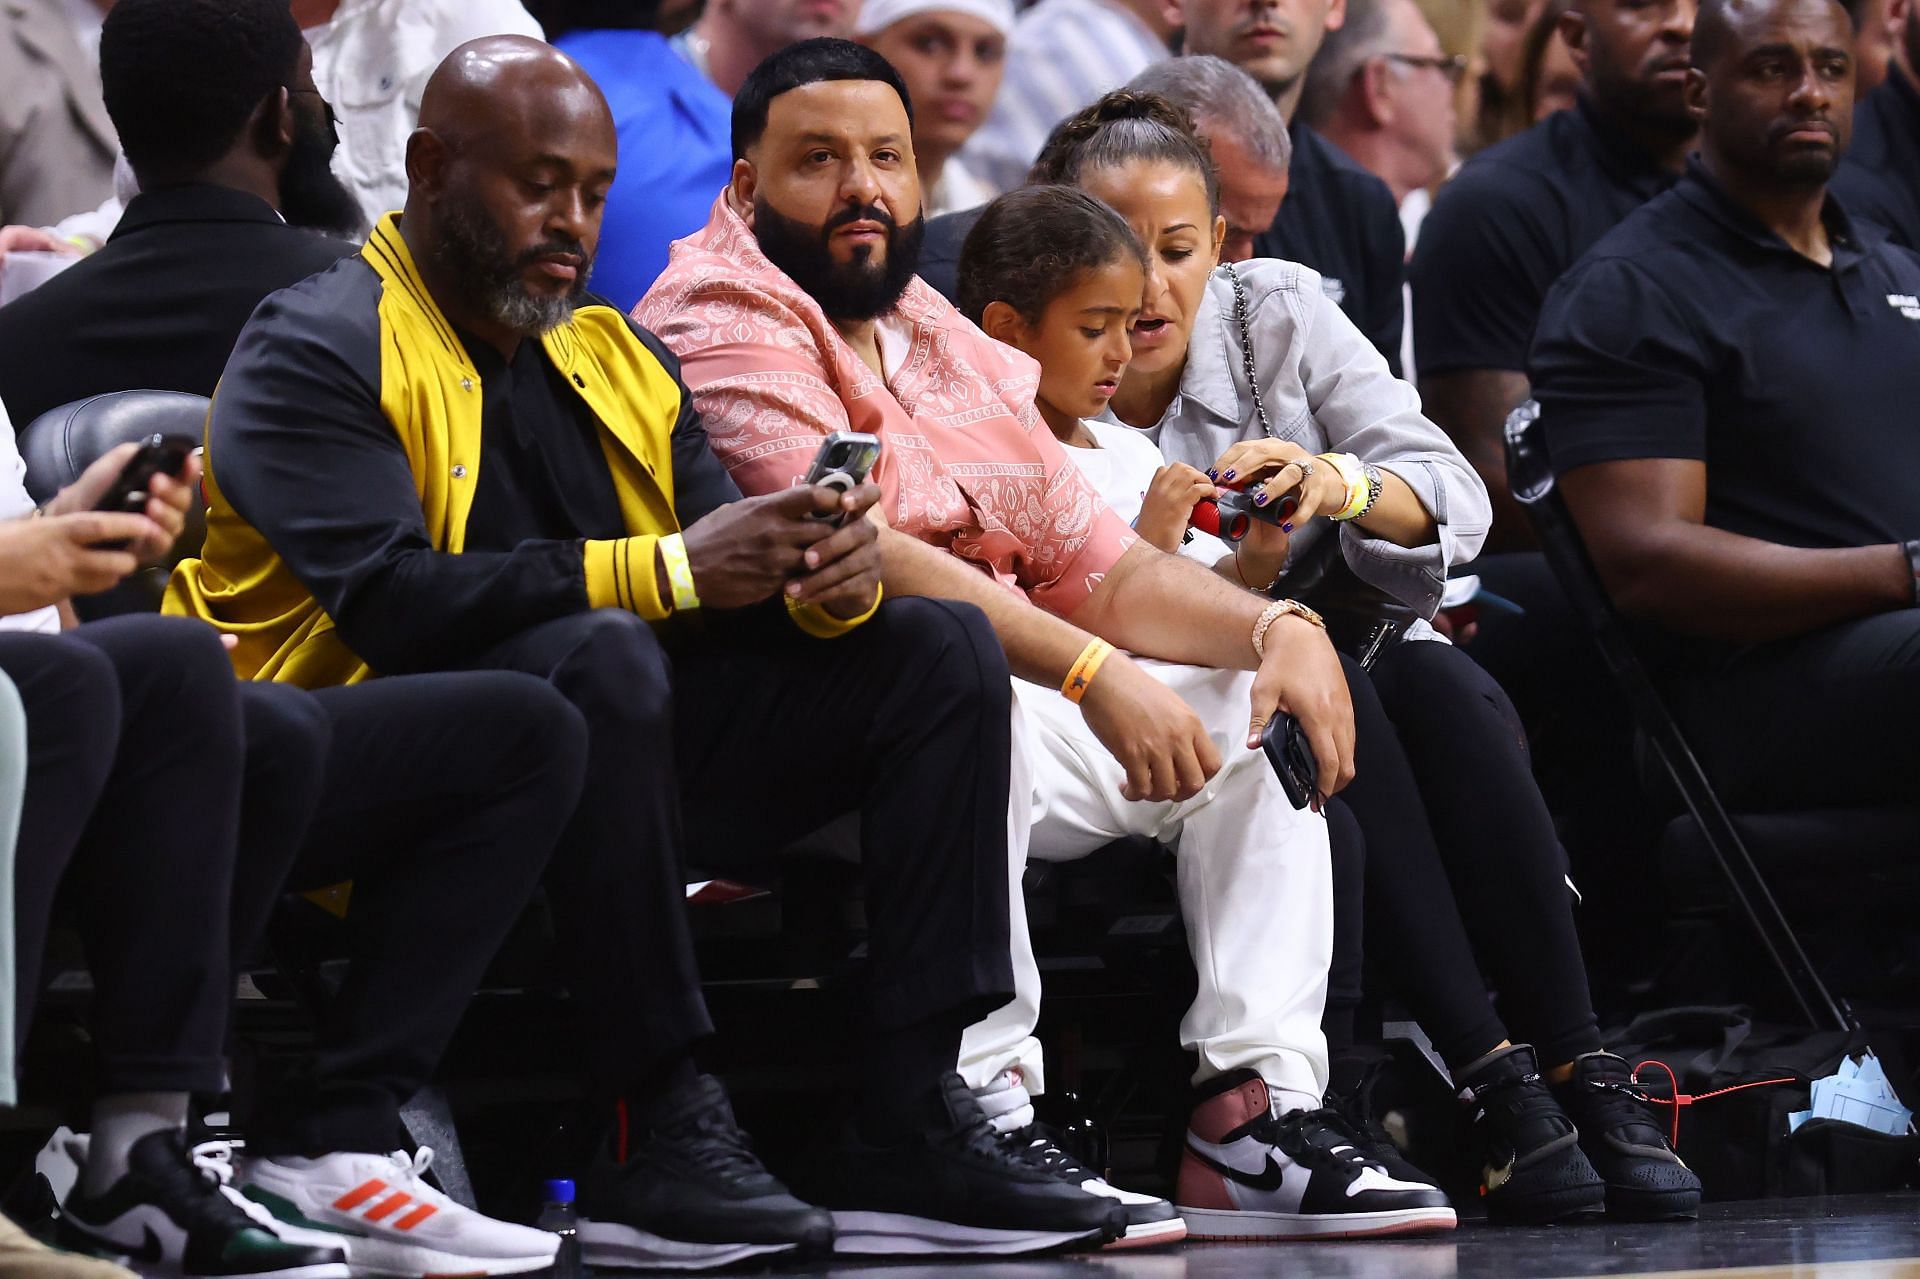 DJ Khaled with his wife and child at the FTX Arena in Miami on Tuesday for Game 5 of the Eastern Conference semifinals.